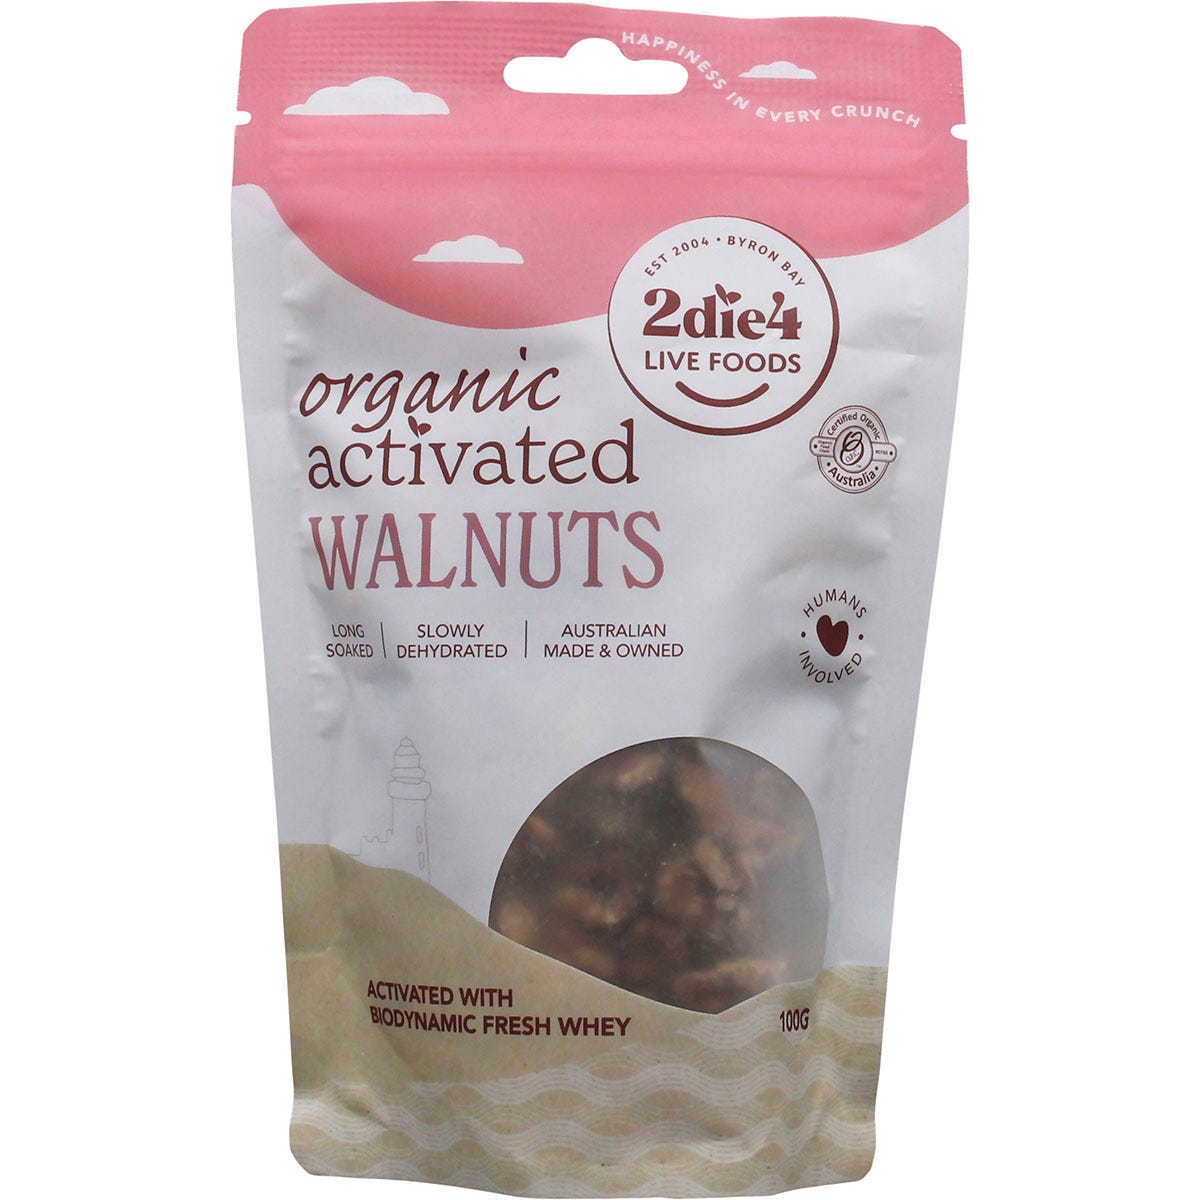 2die4 Live Foods Organic Activated Walnuts Activated with Fresh Whey 100g - Dr Earth - Dried Fruits Nuts & Seeds